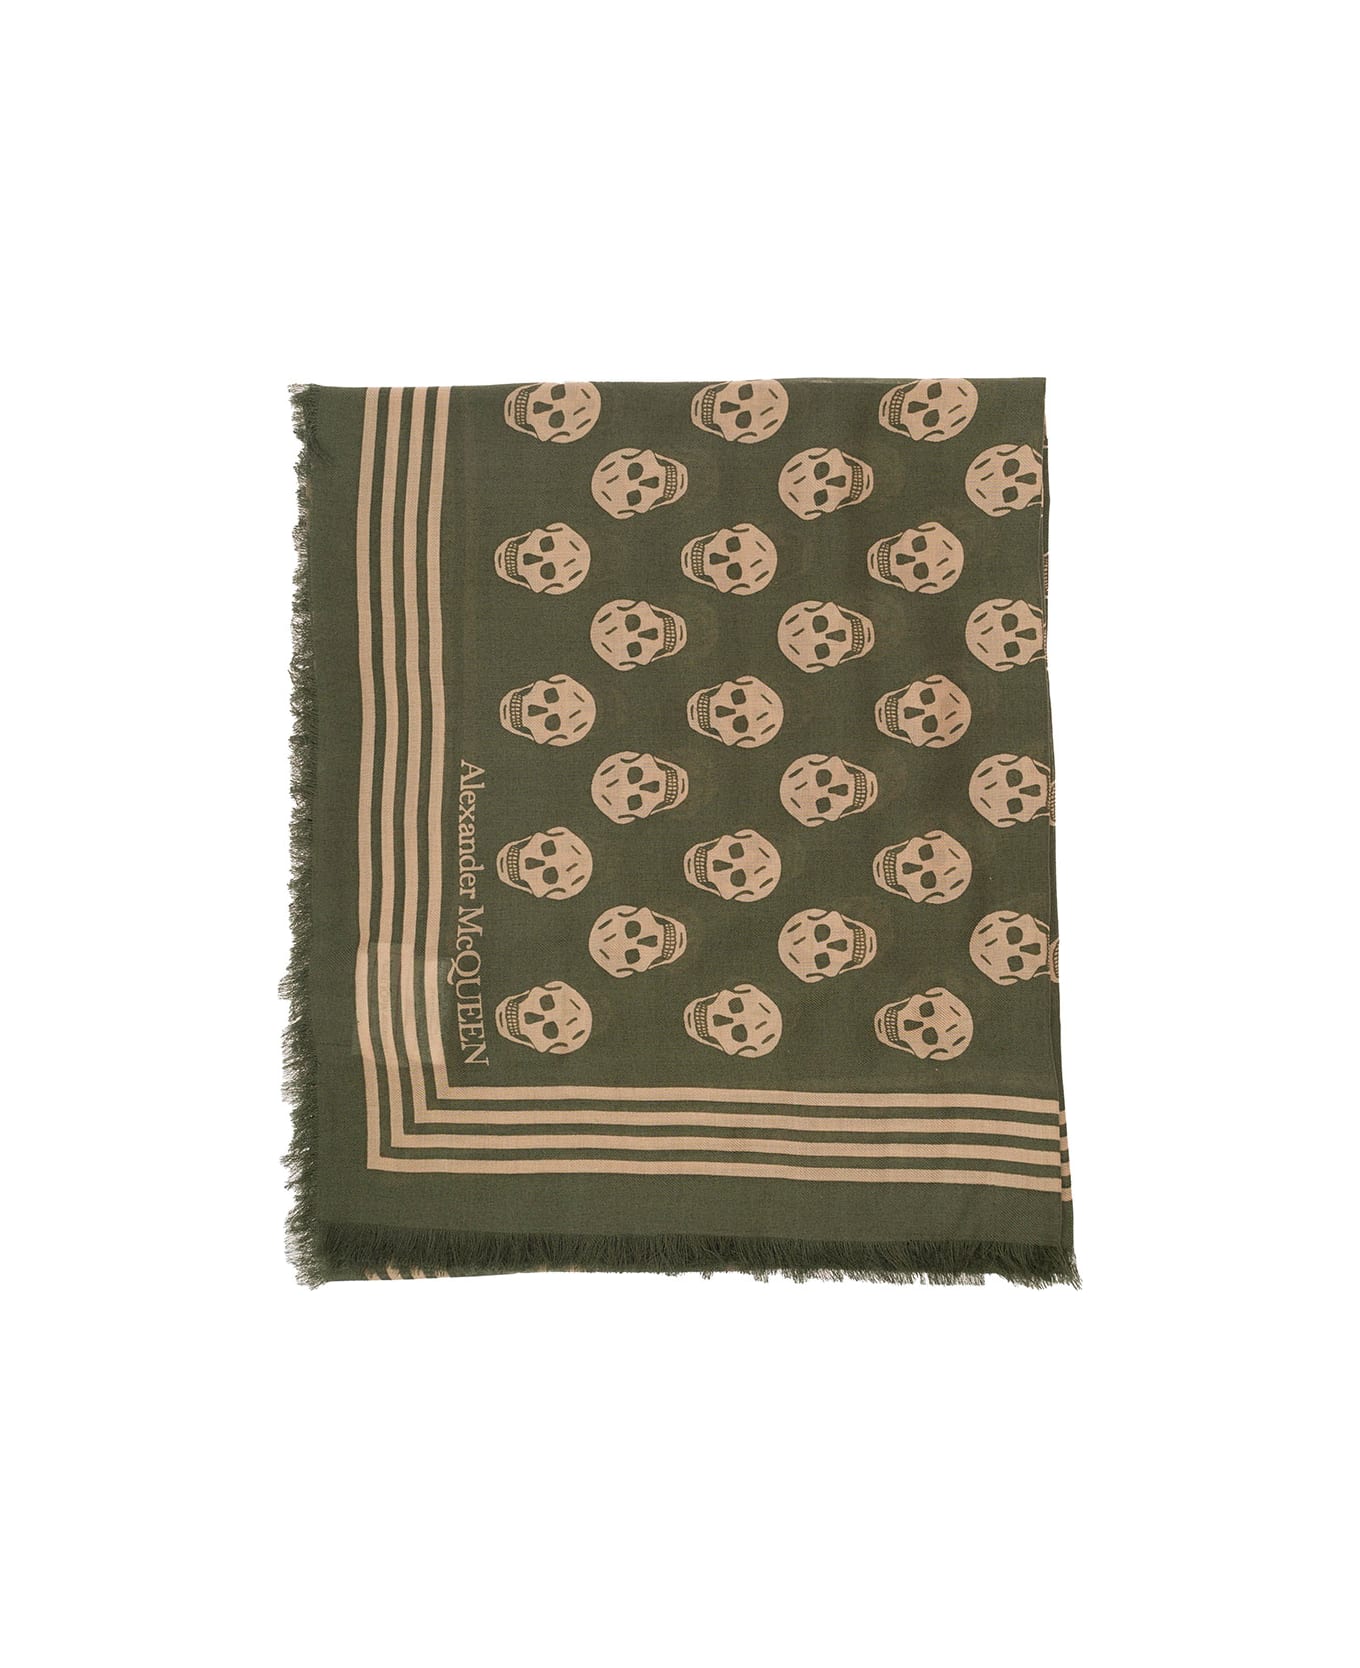 Alexander McQueen Scarf With Skull And Logo Print - Green